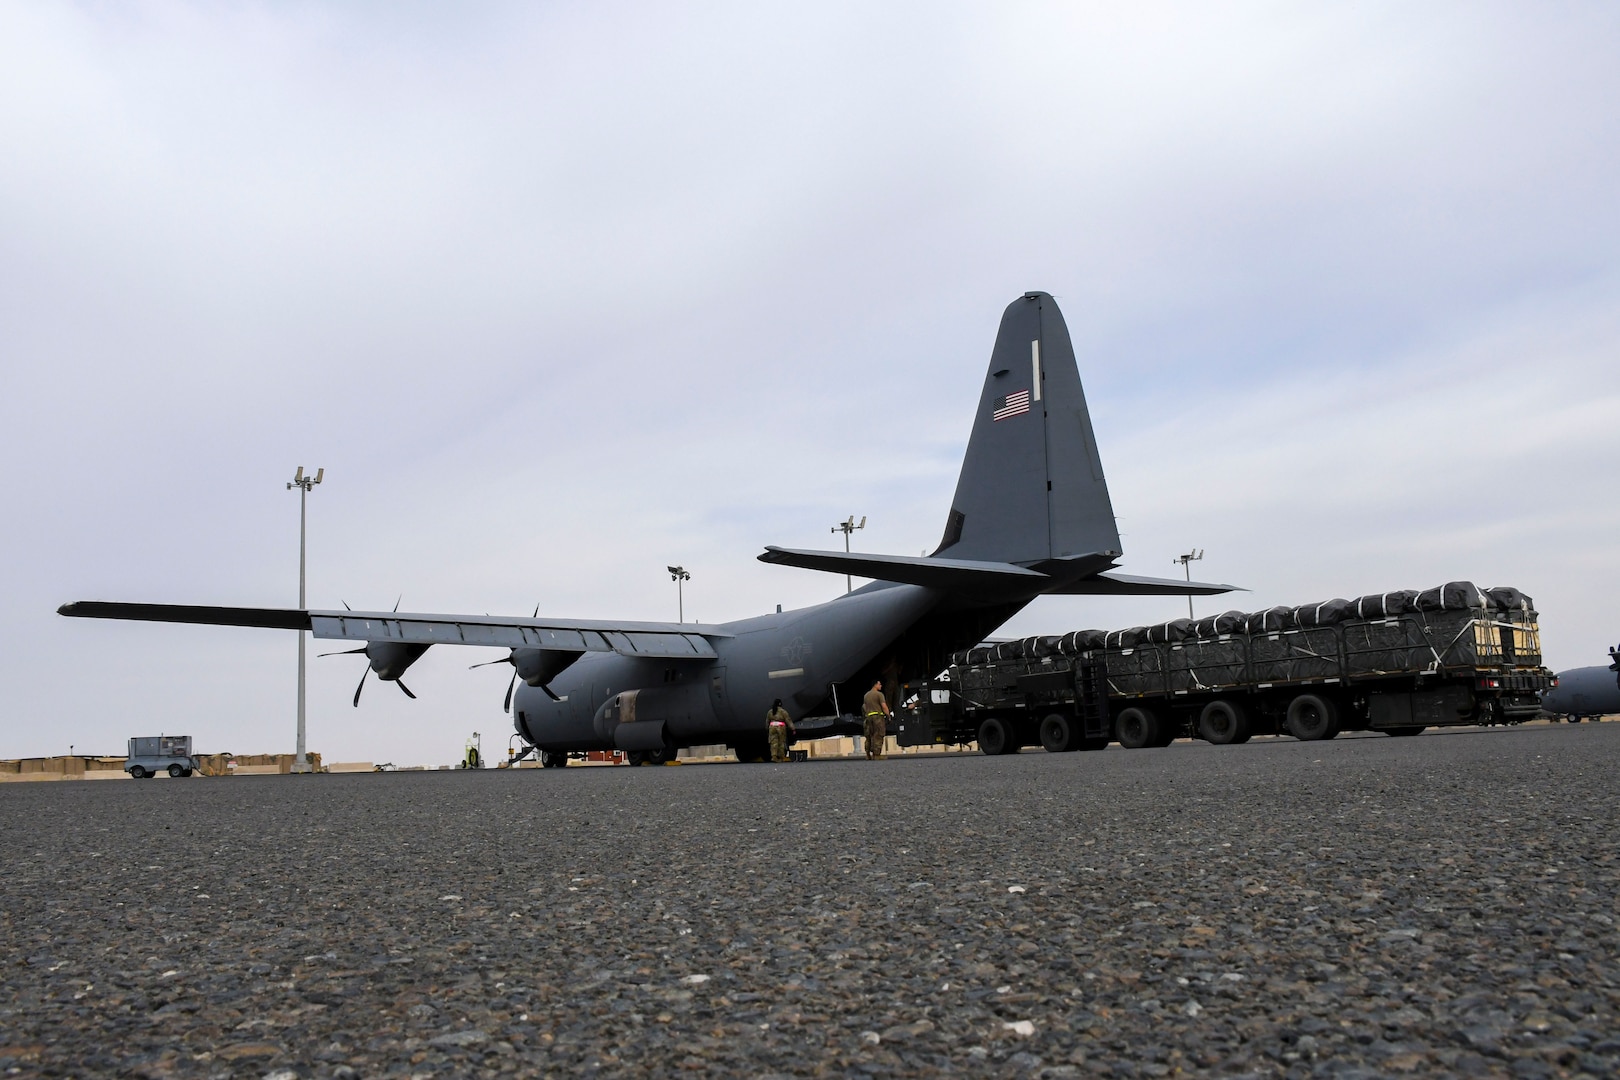 Bundles of humanitarian aid destined for Gaza are loaded onto the U.S. Air Force C-130J Super Hercules at an undisclosed location within the U.S. Central Command area of responsibility, April 28, 2024. Delivering humanitarian aid via airdrop ensures the aid is received by civilians most in need without delay for
communities that may be difficult to reach on the ground. (U.S. Air Force photo)